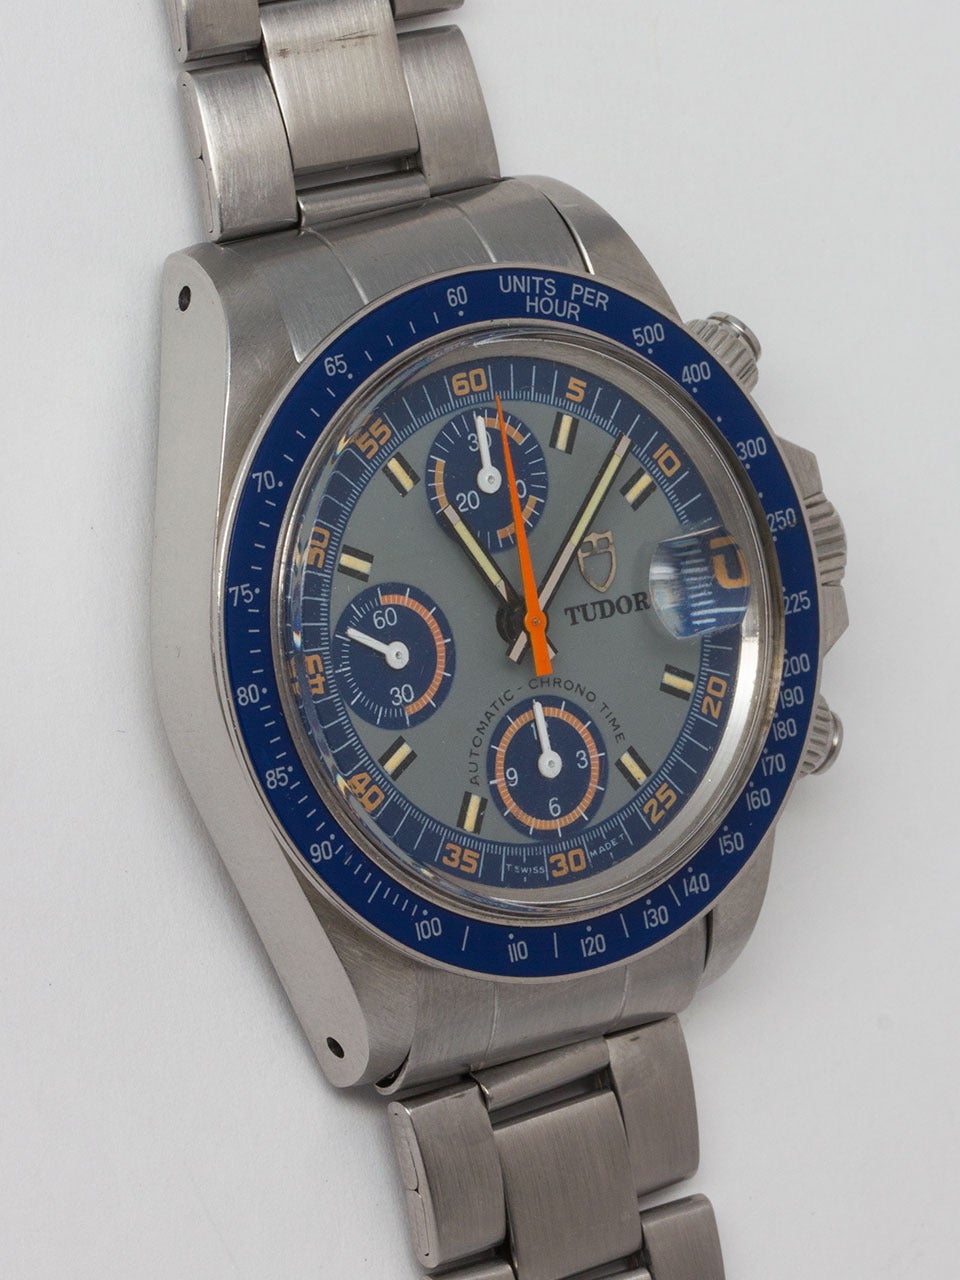 Tudor Stainless Steel Monte Carlo ref 9420/0 serial # 9.4 million circa 1980's. Scarce and exceptional condition example with blue fixed tachometer bezel. Original blue gray dial with blue registers and outer band with orange detail and orange sweep